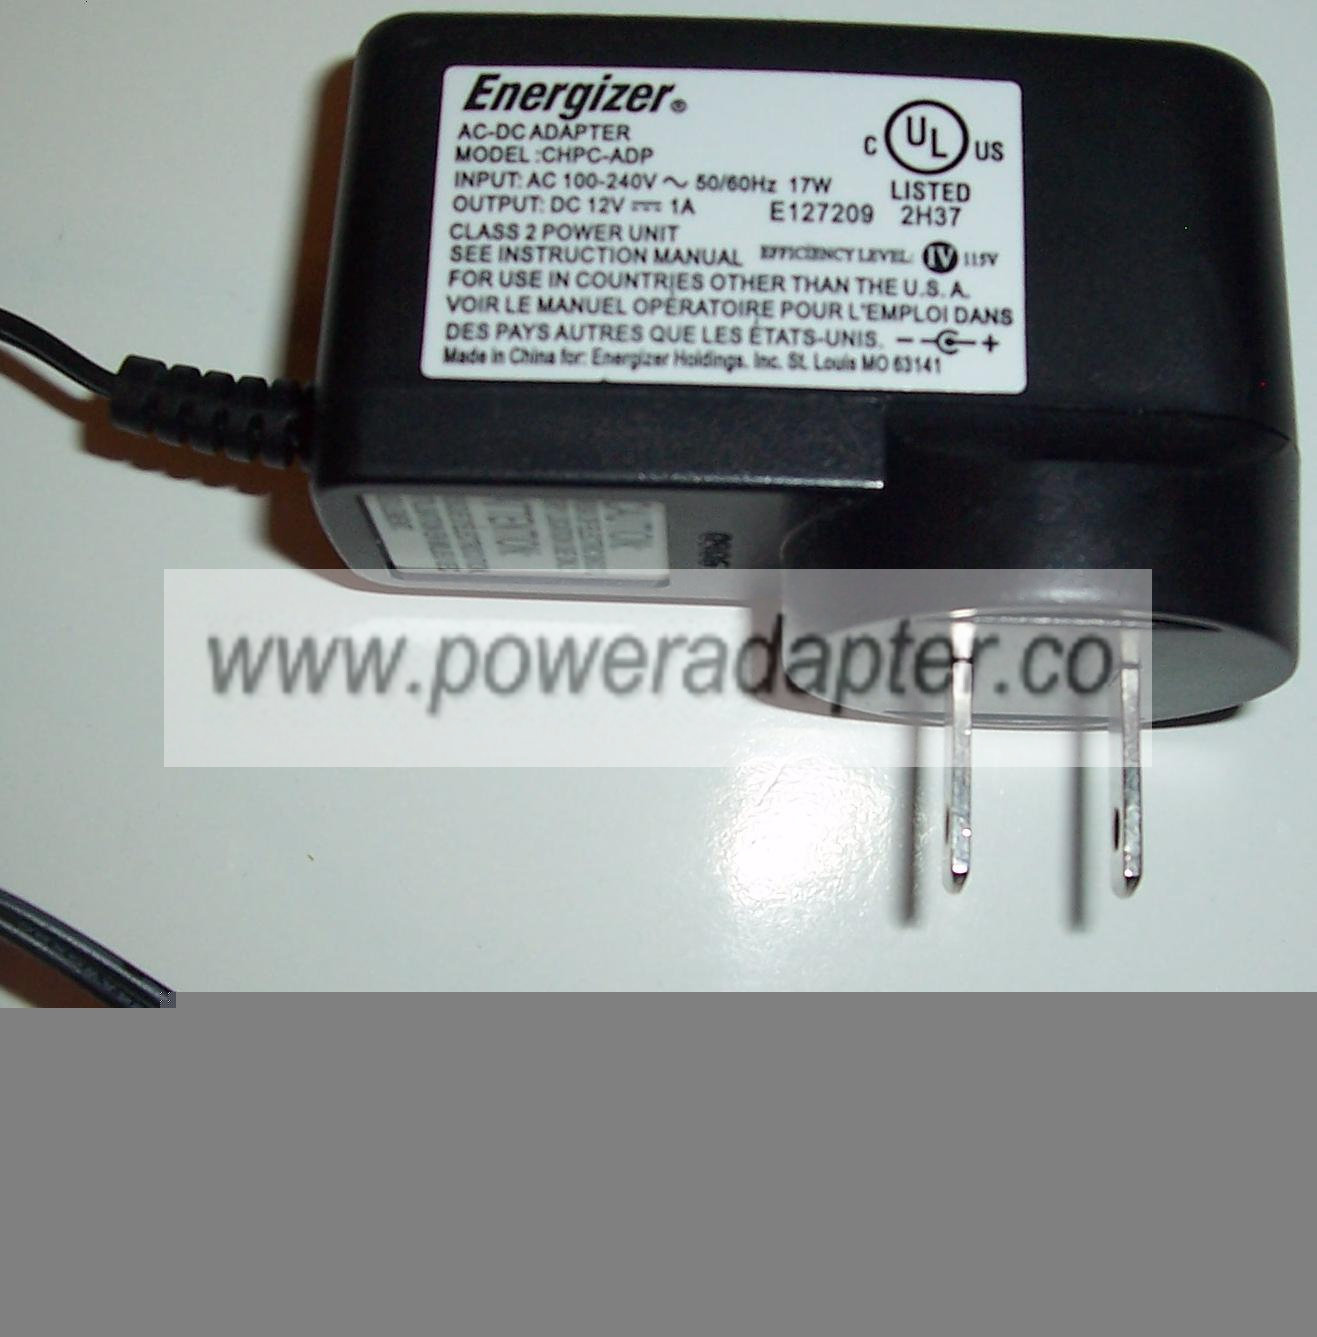 ENERGIZER CHPC-ADP AC DC ADAPTER 12V 1A CLASS 2 POWER SUPPLY - Click Image to Close